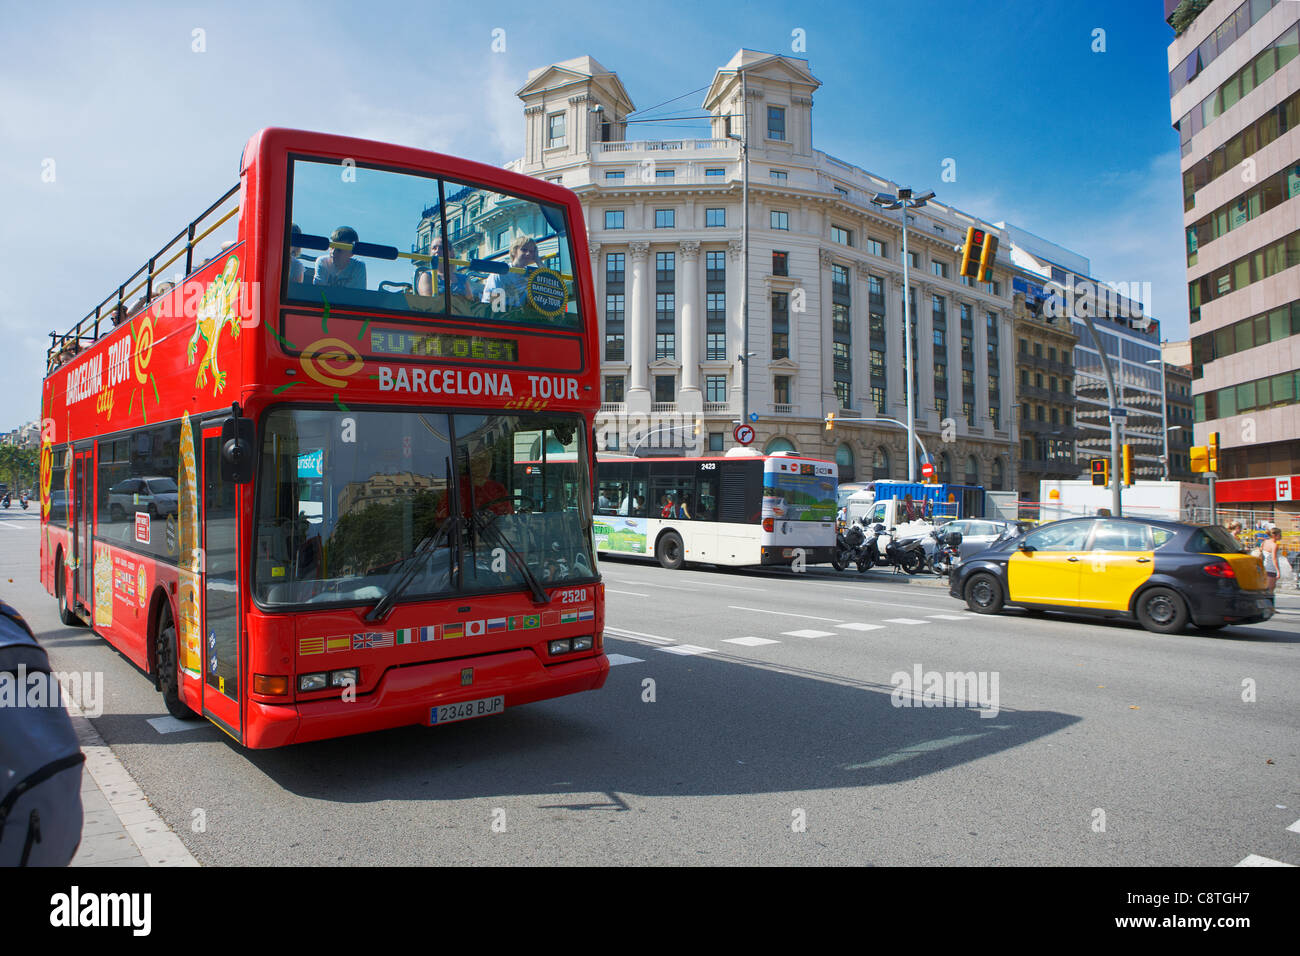 Red double-deck tour bus with open top on Passeig de Gracia. Barcelona, Catalonia, Spain. Stock Photo